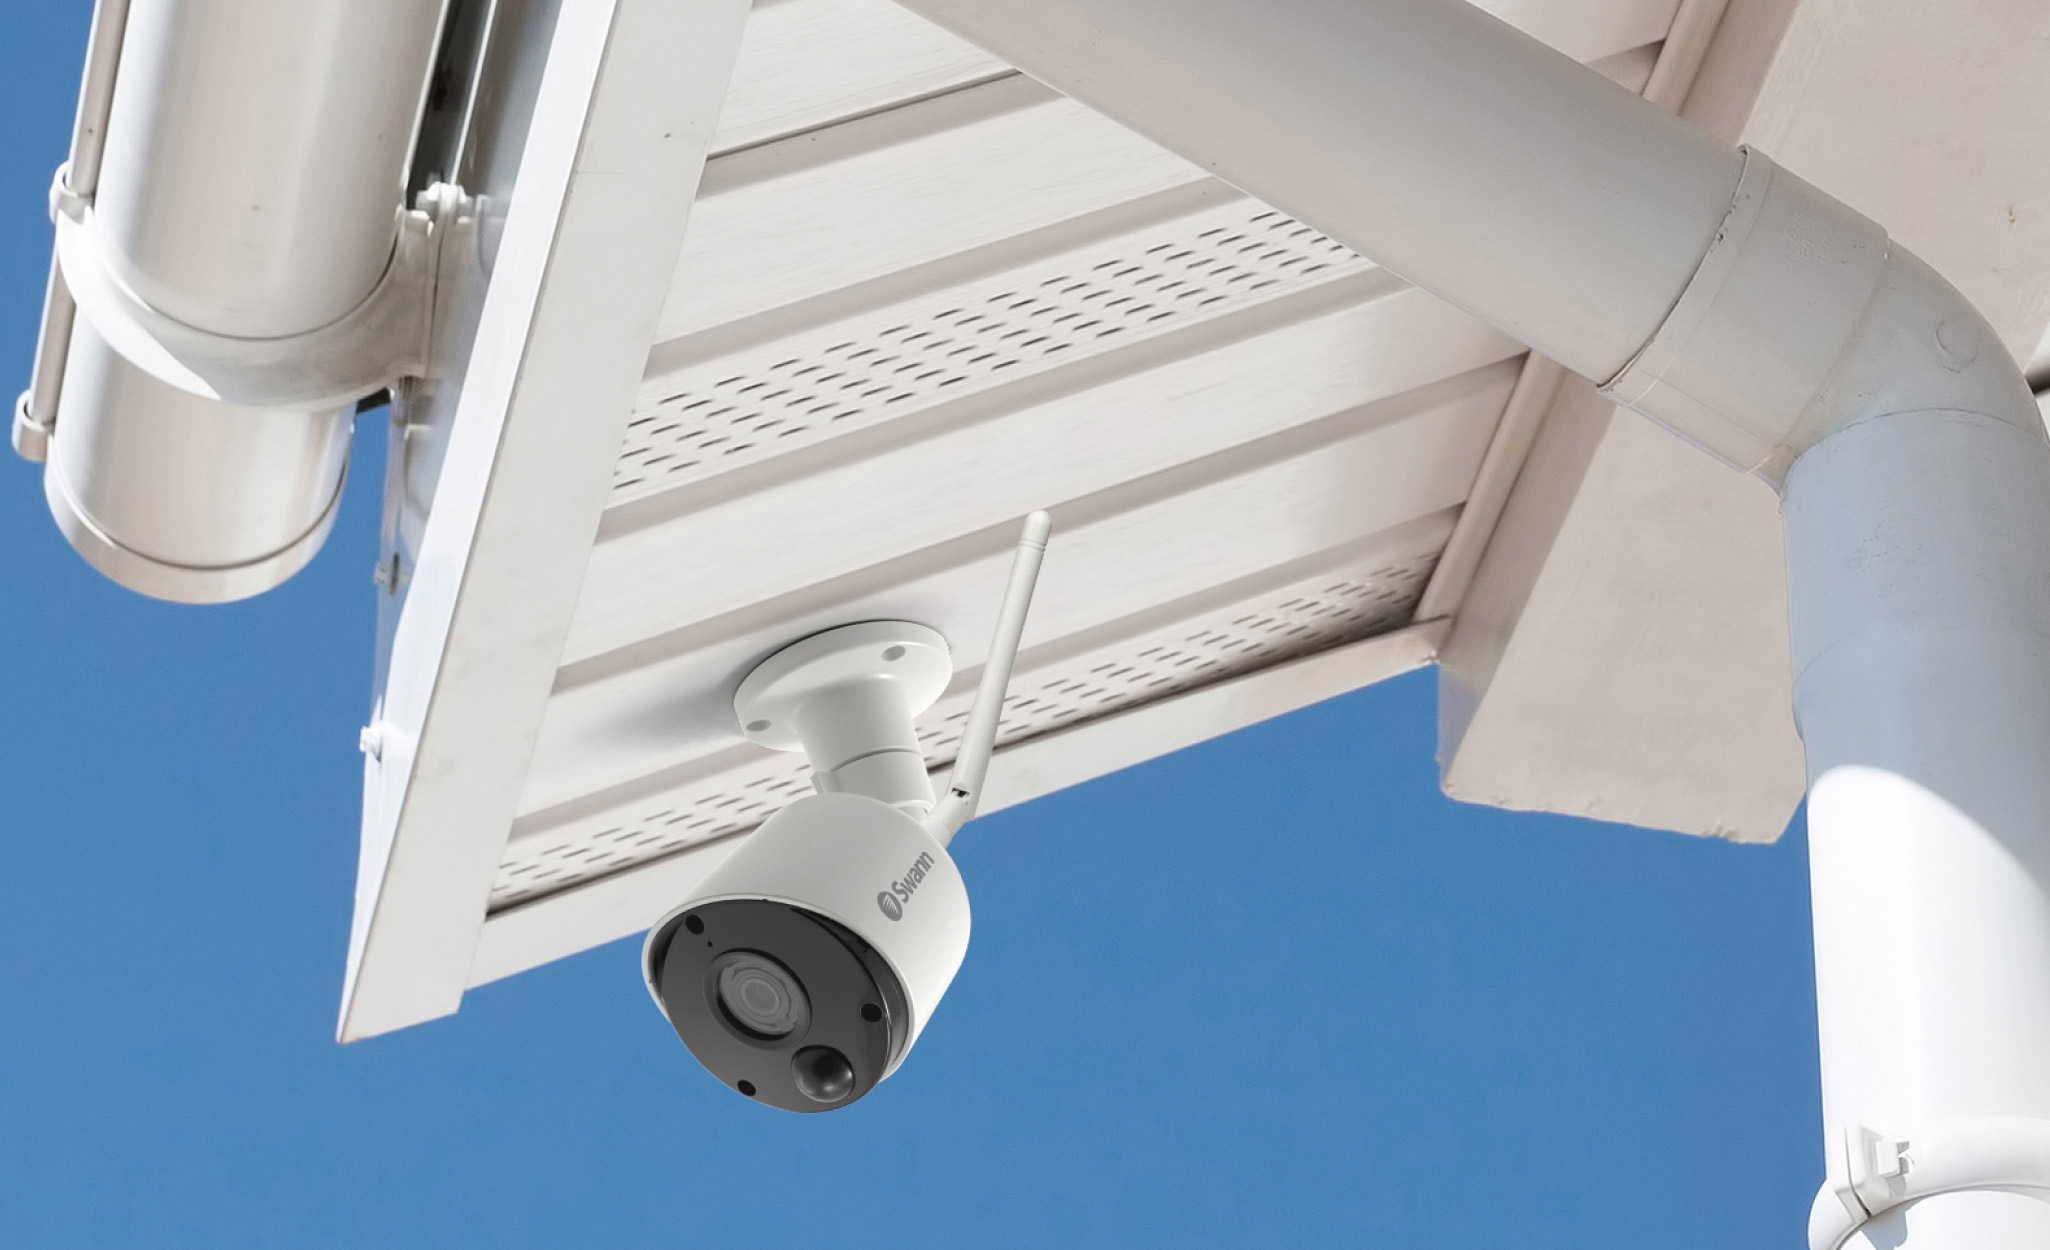 An outdoor security camera installed below a roof.